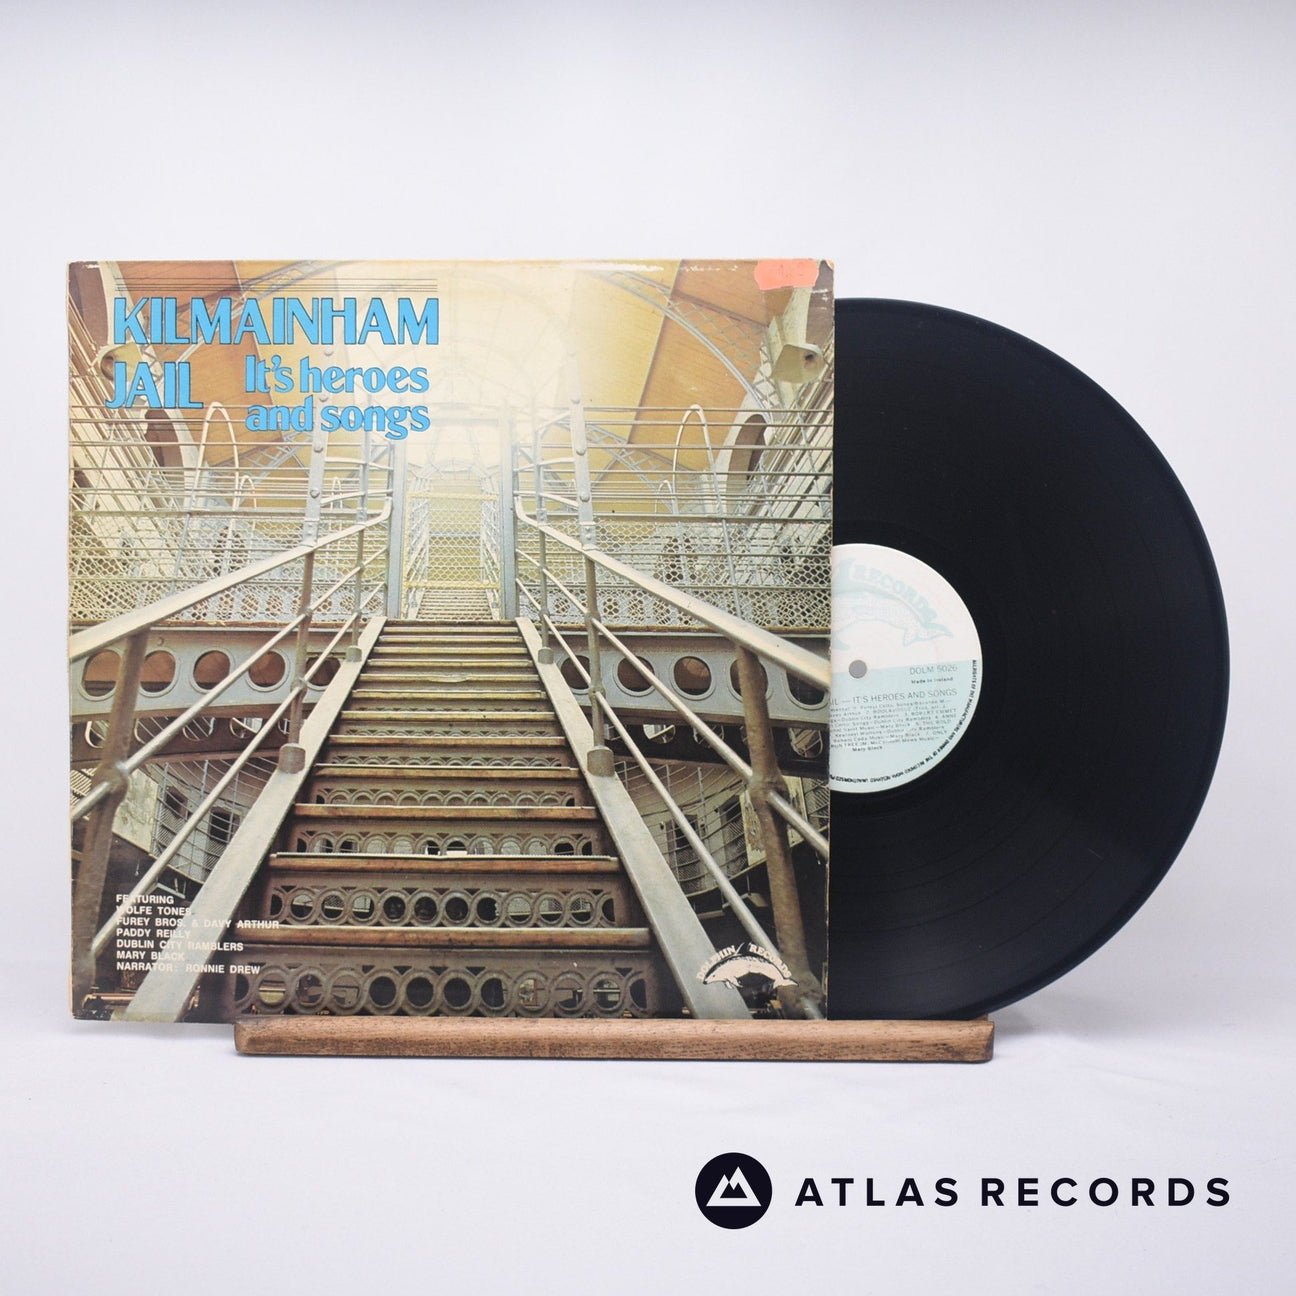 Various Kilmainham Jail - It's Heroes And Songs LP Vinyl Record - Front Cover & Record